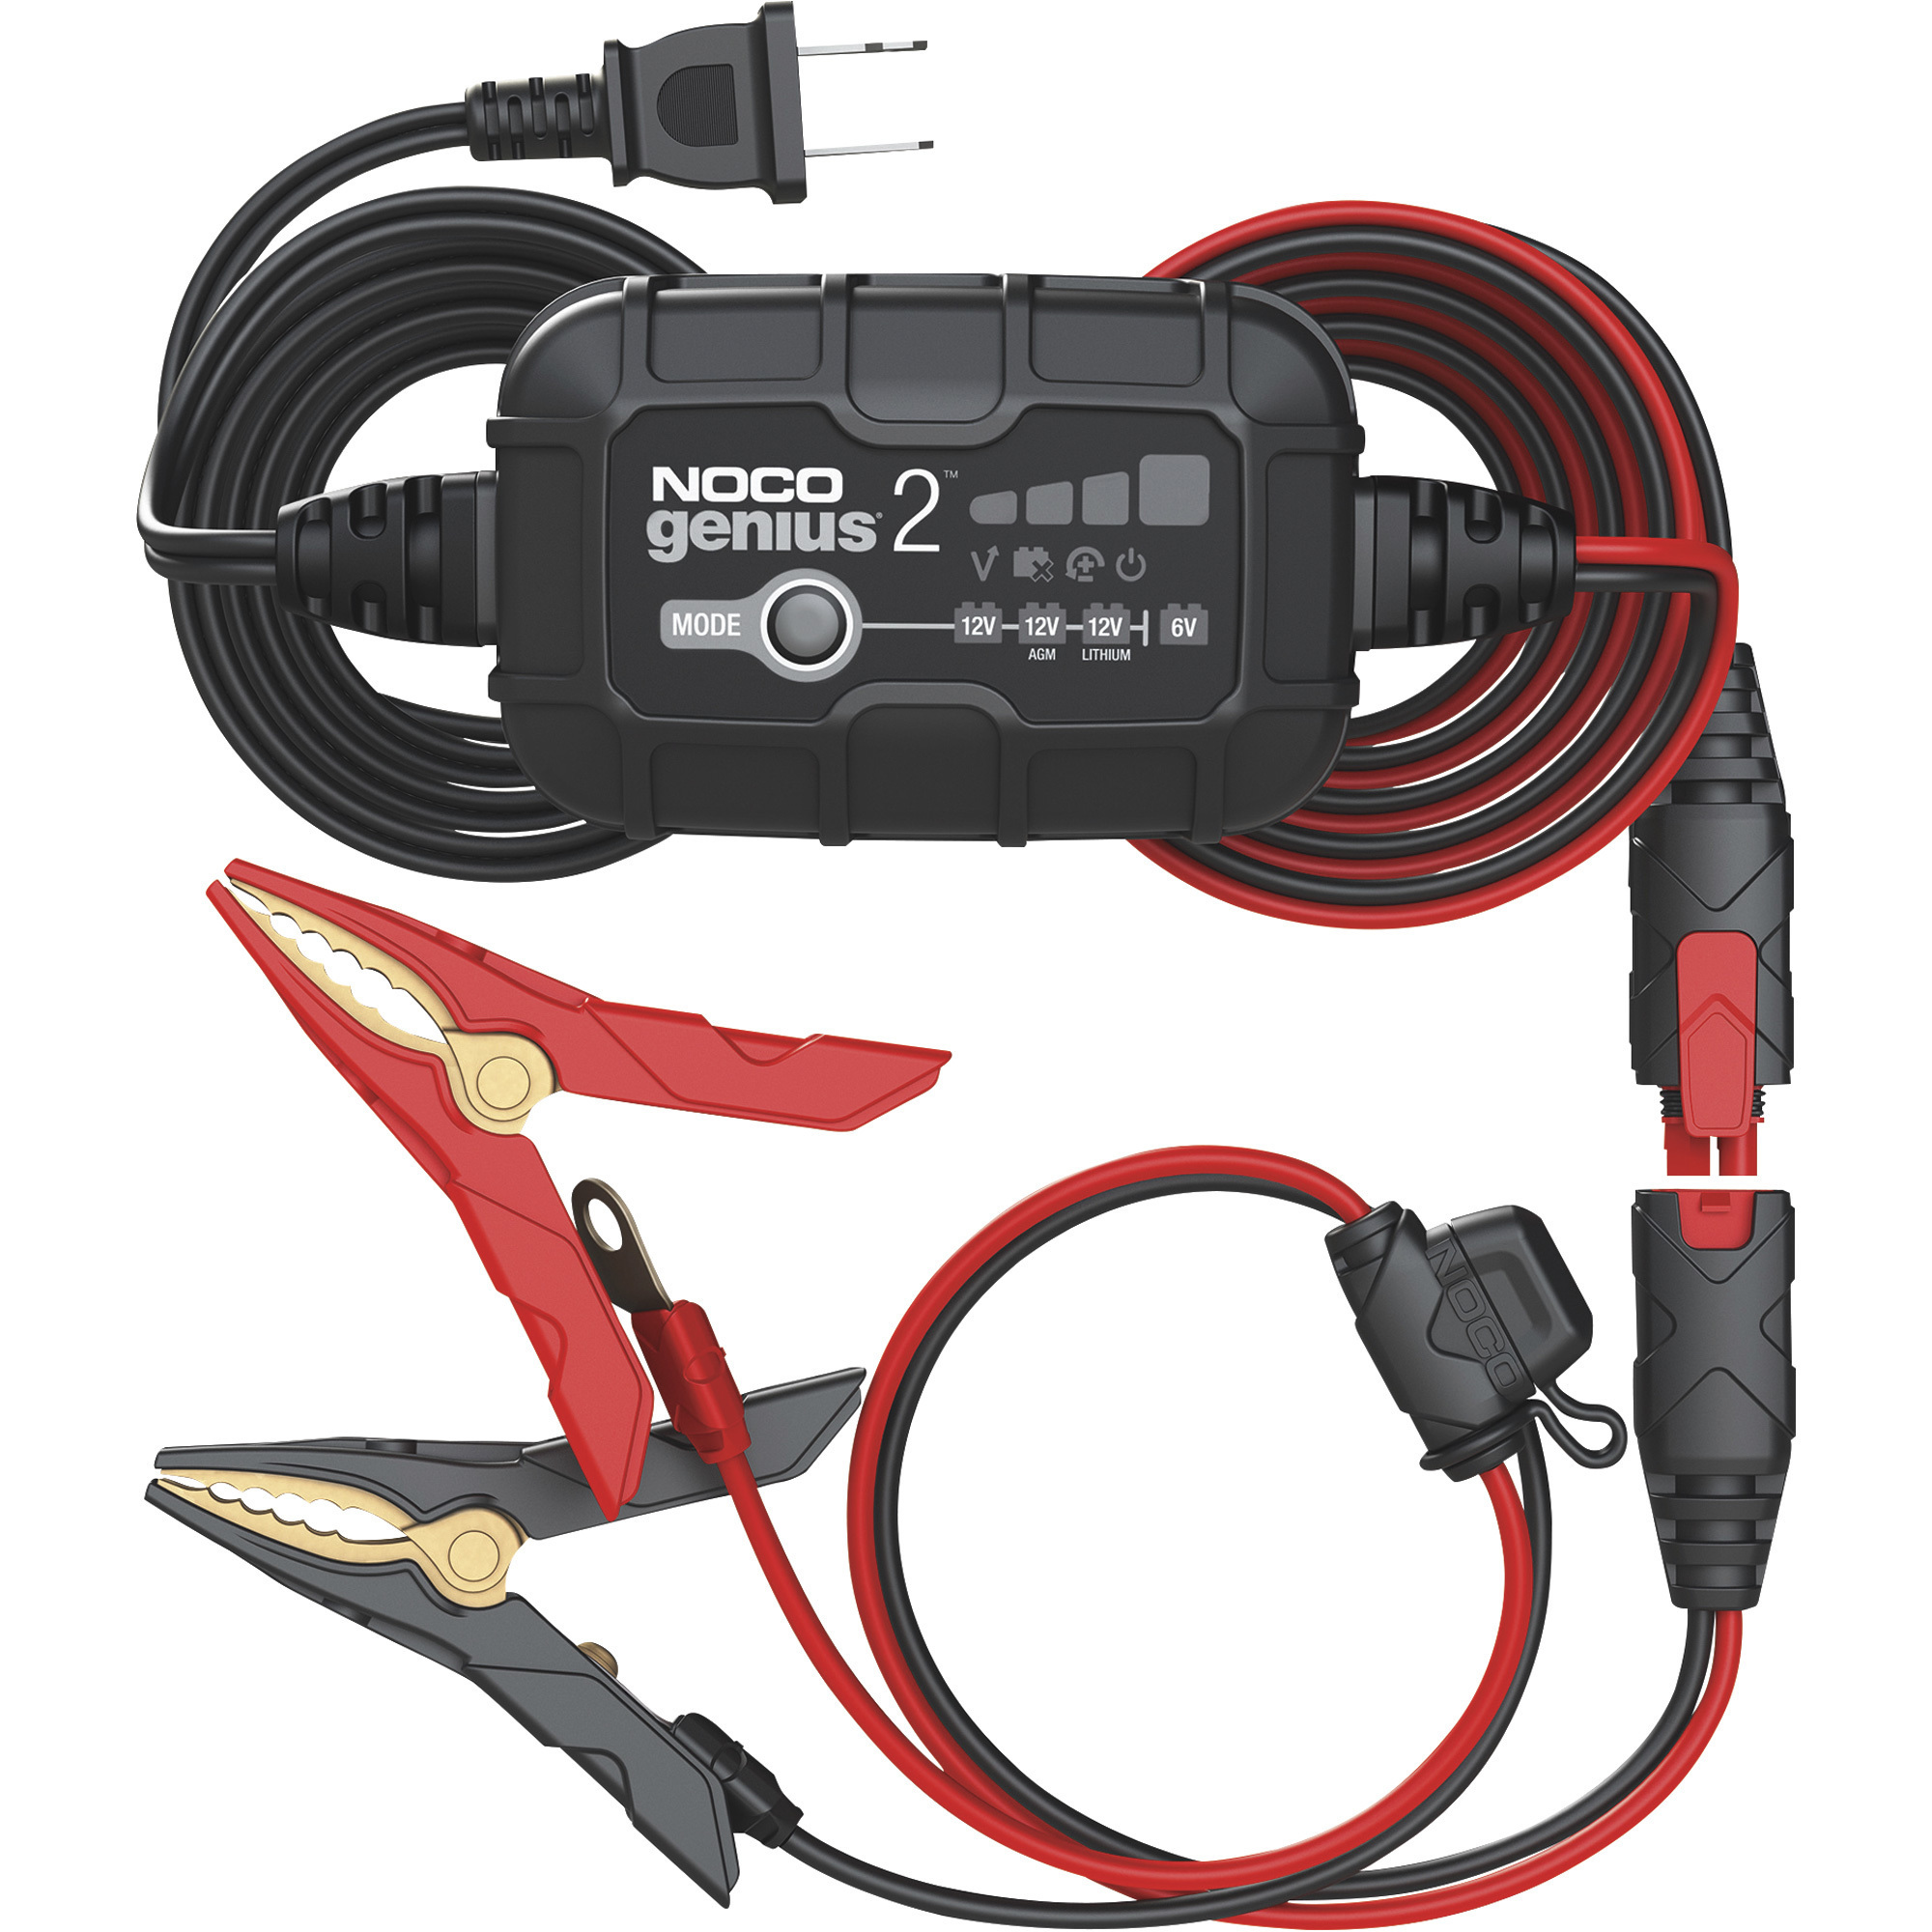 NOCO Genius2 Portable Automatic Battery Charger/Maintainer â 6/12 Volt, Model GENIUS2